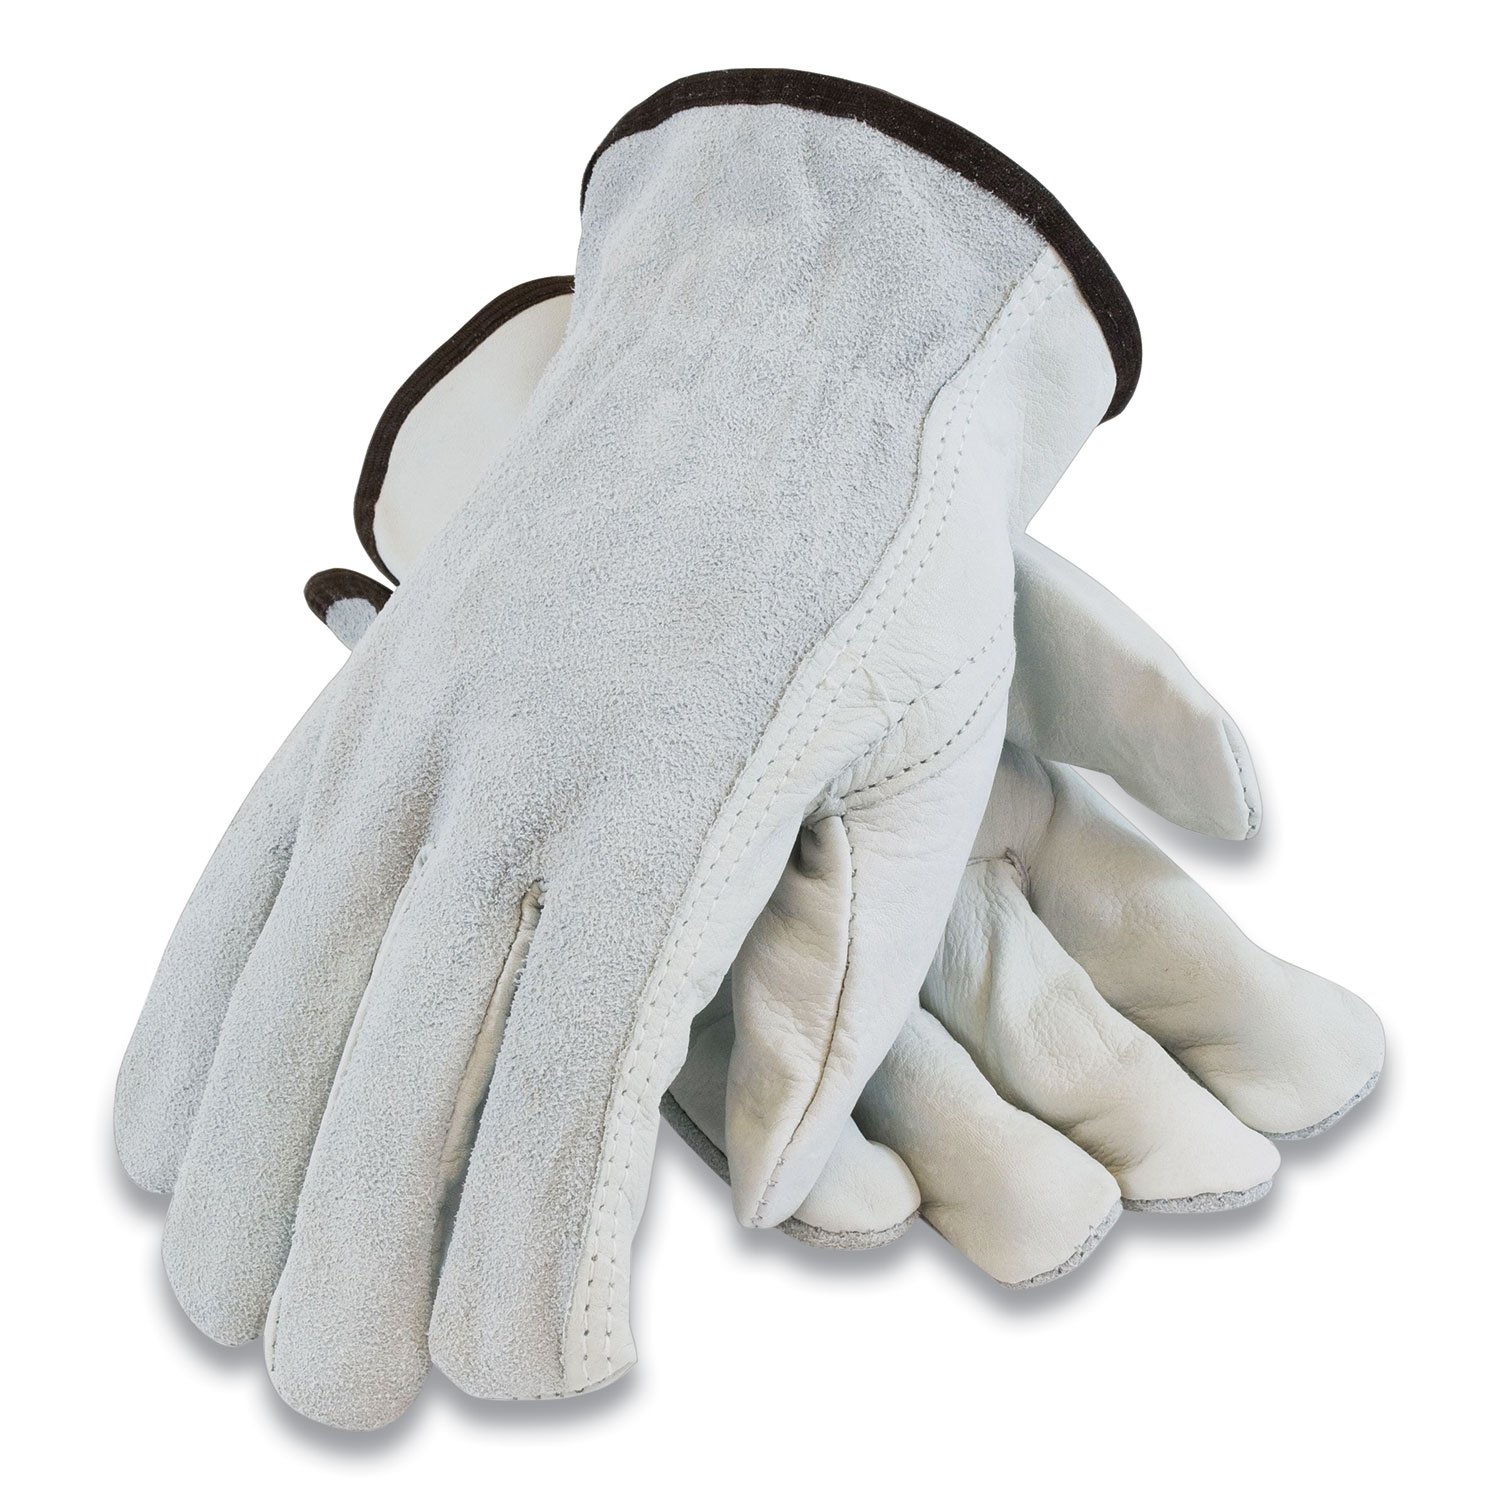  PIP 68-161SB/S Top-Grain Cowhide Leather Work Gloves, Regular Grade, Small, Gray (PID179957) 